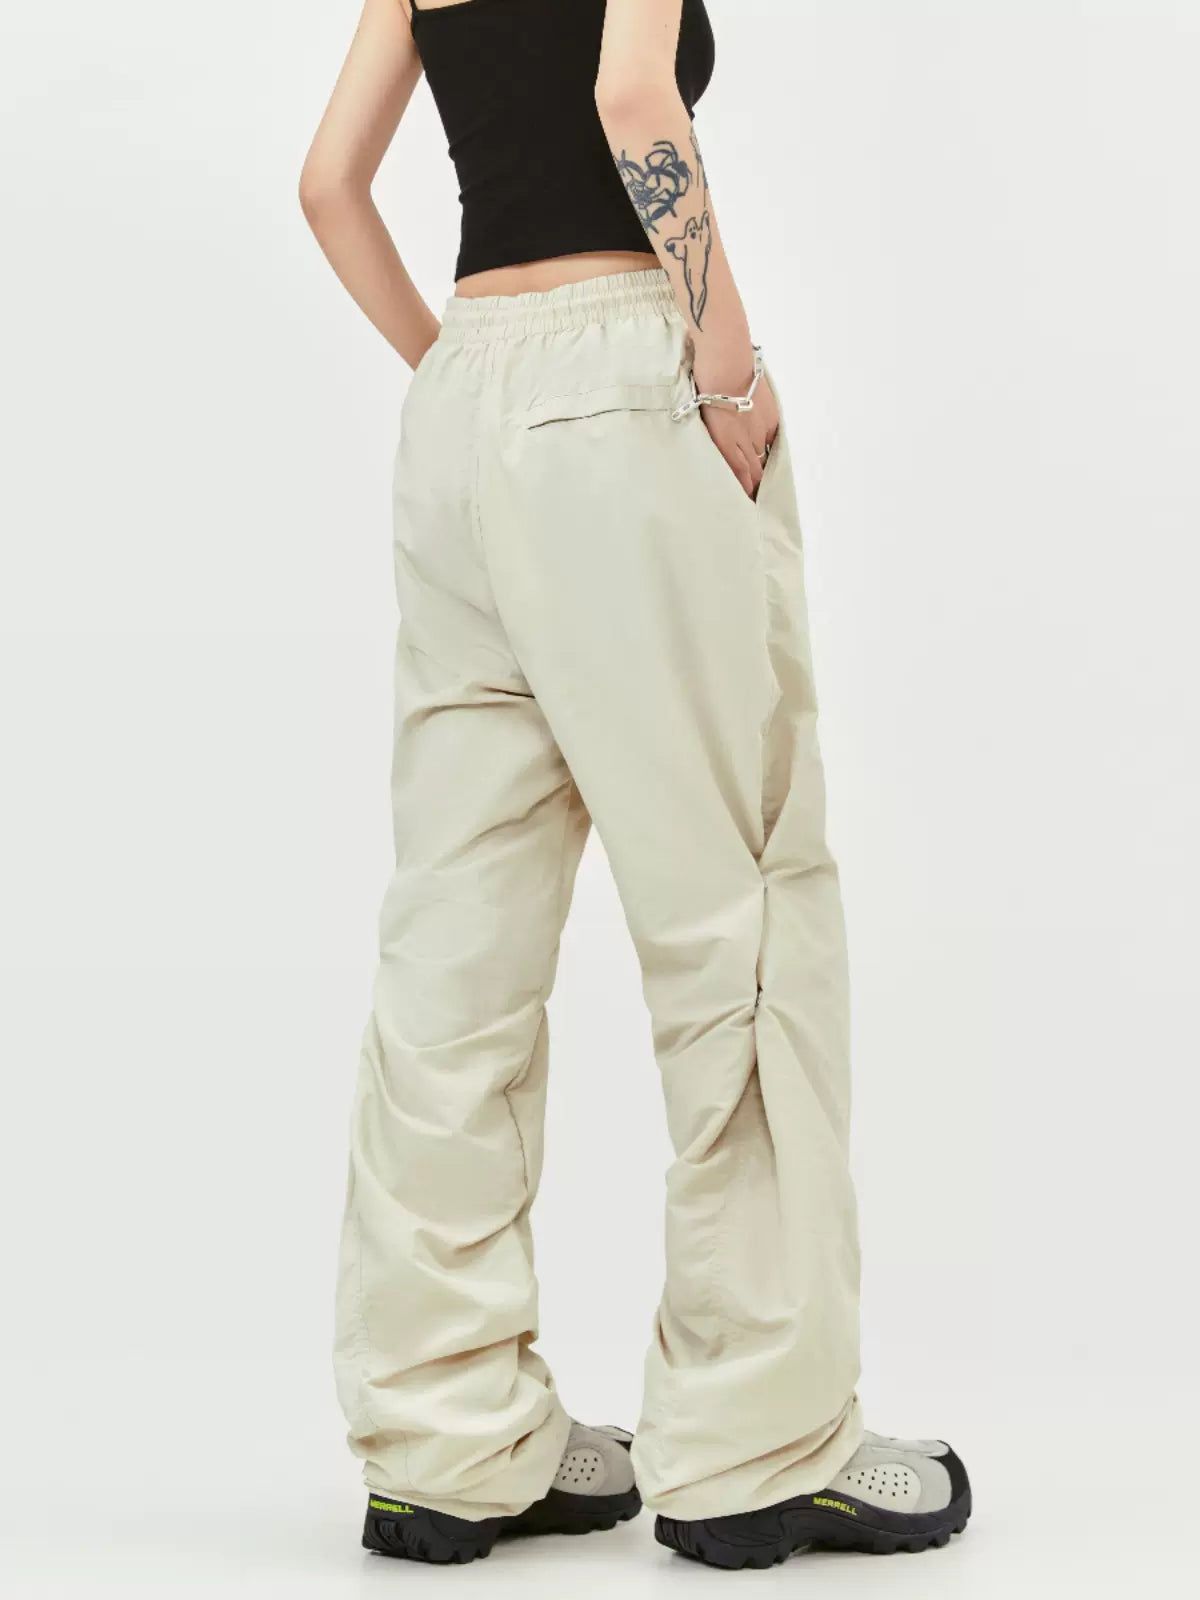 Drawstring Snap Button Pleated Pants Korean Street Fashion Pants By Made Extreme Shop Online at OH Vault